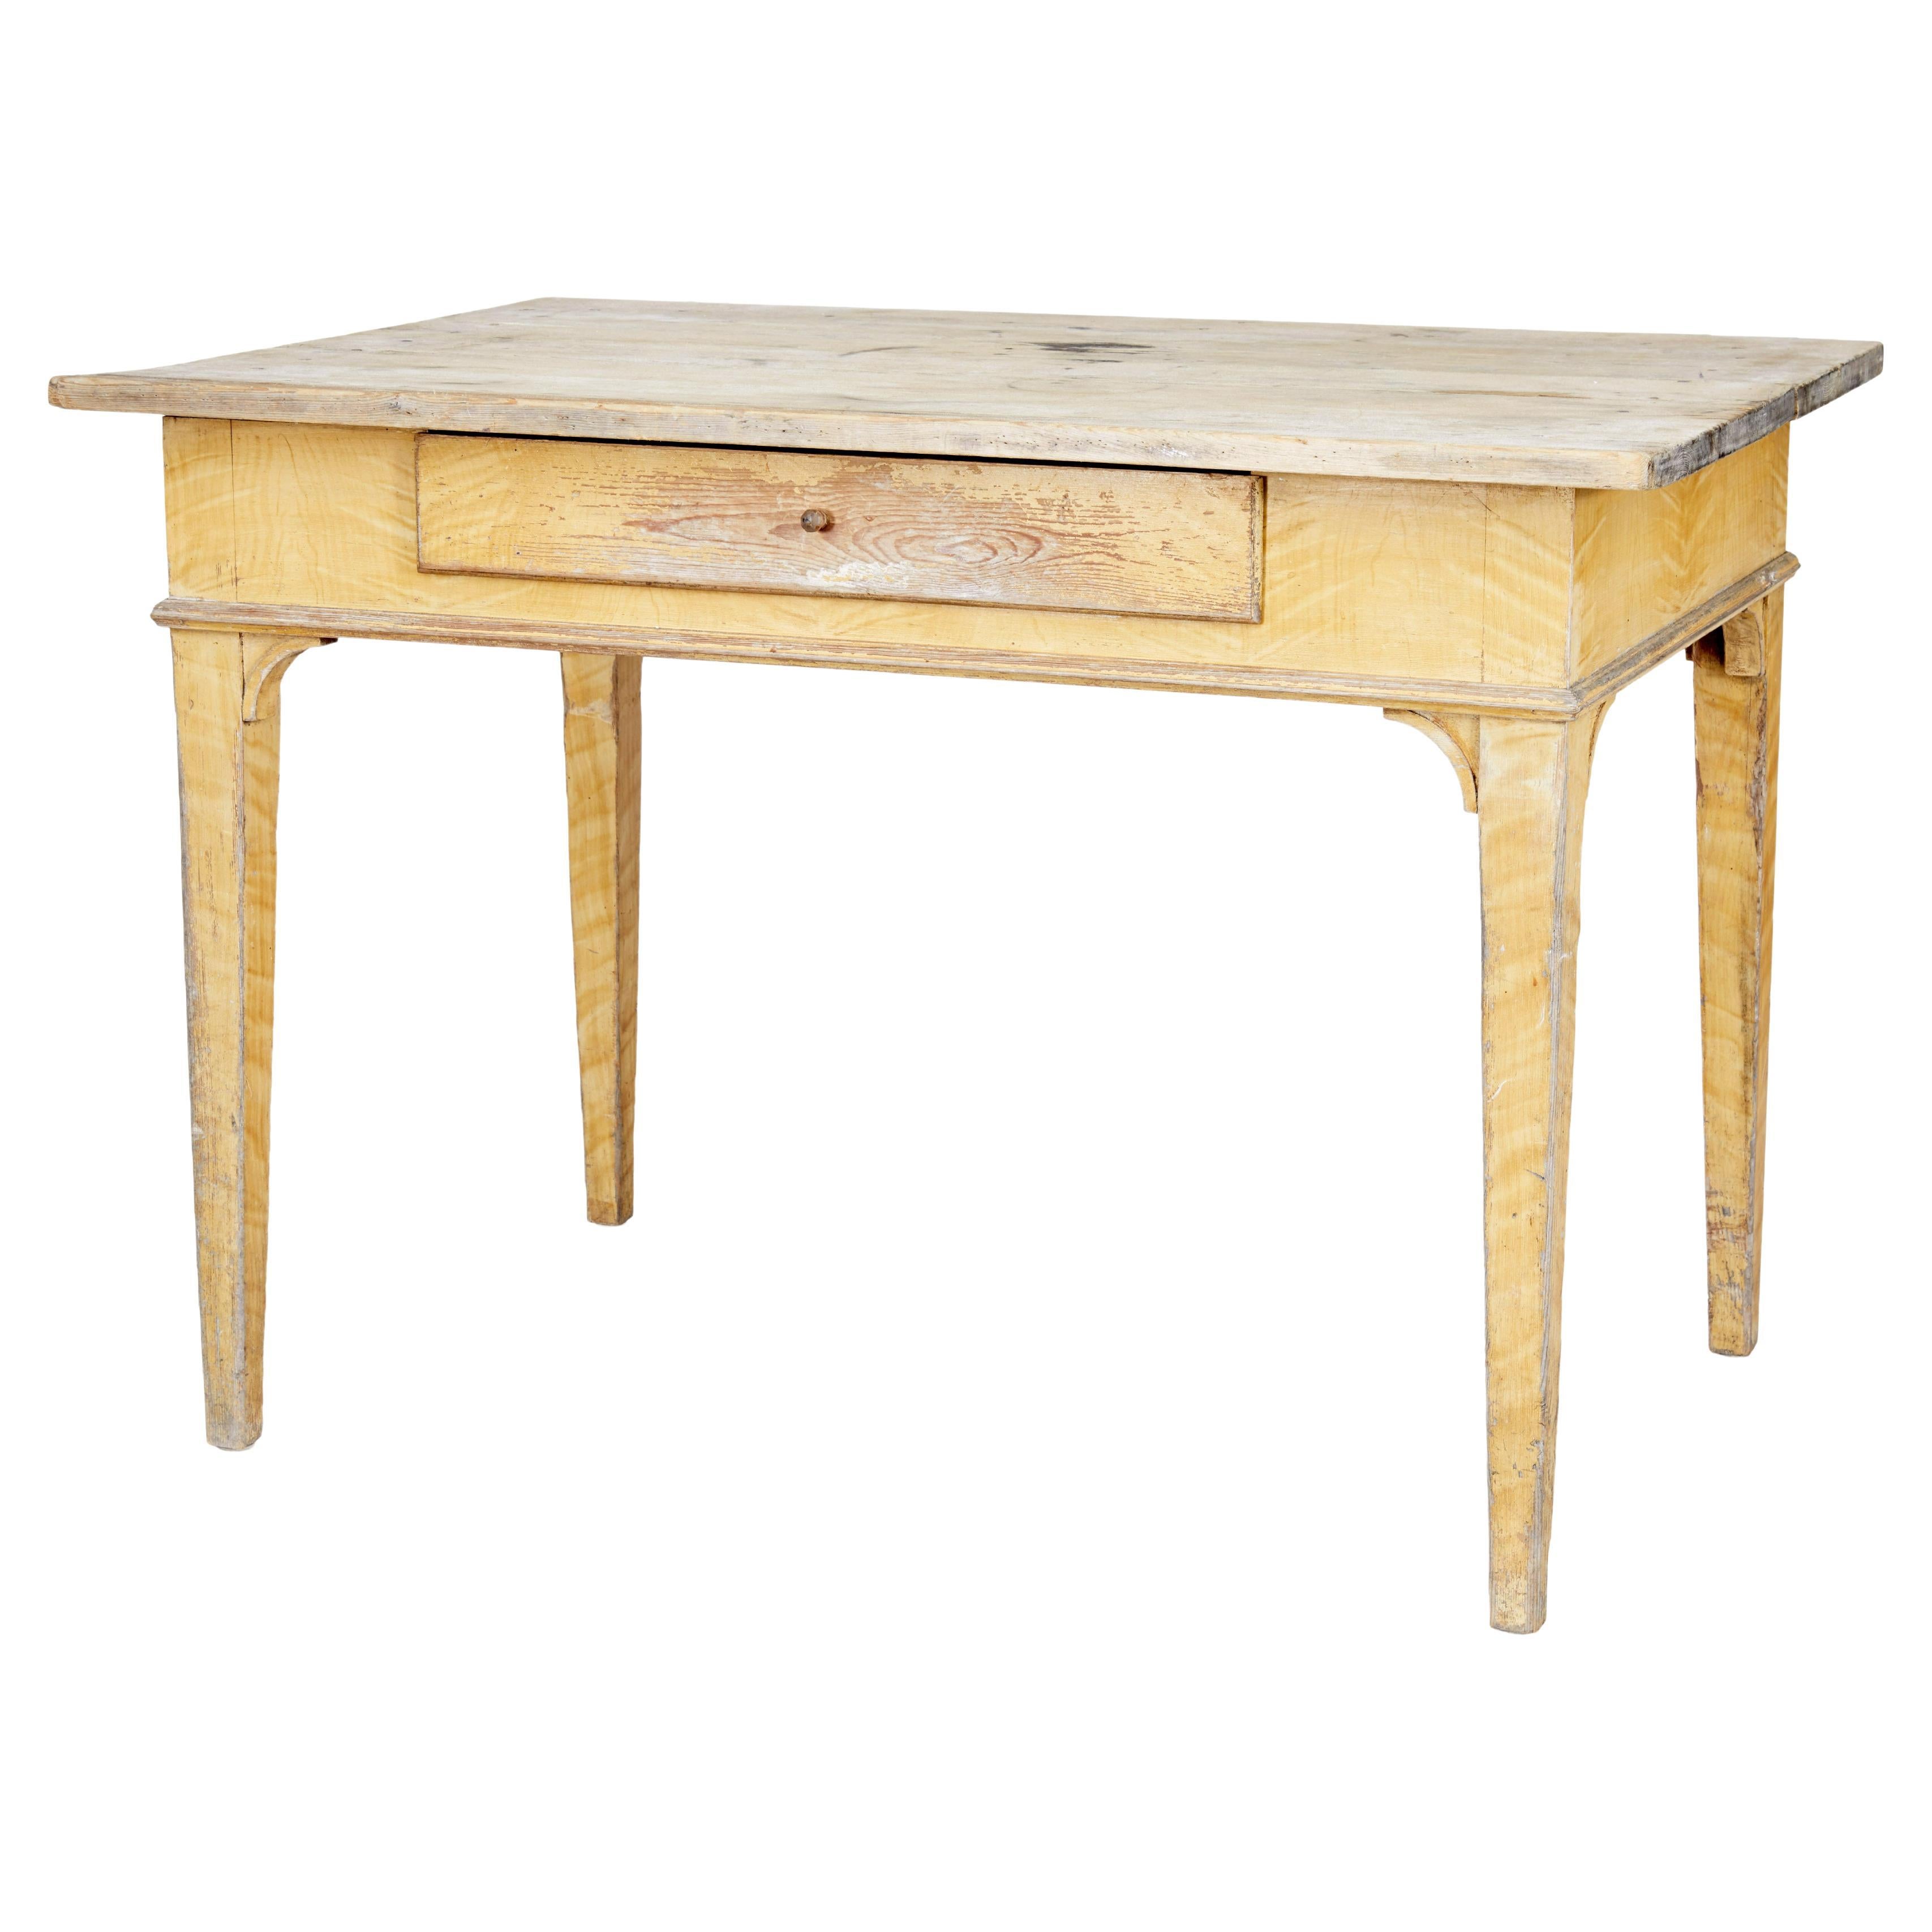 Swedish 19th Century Painted Pine Kitchen Table For Sale